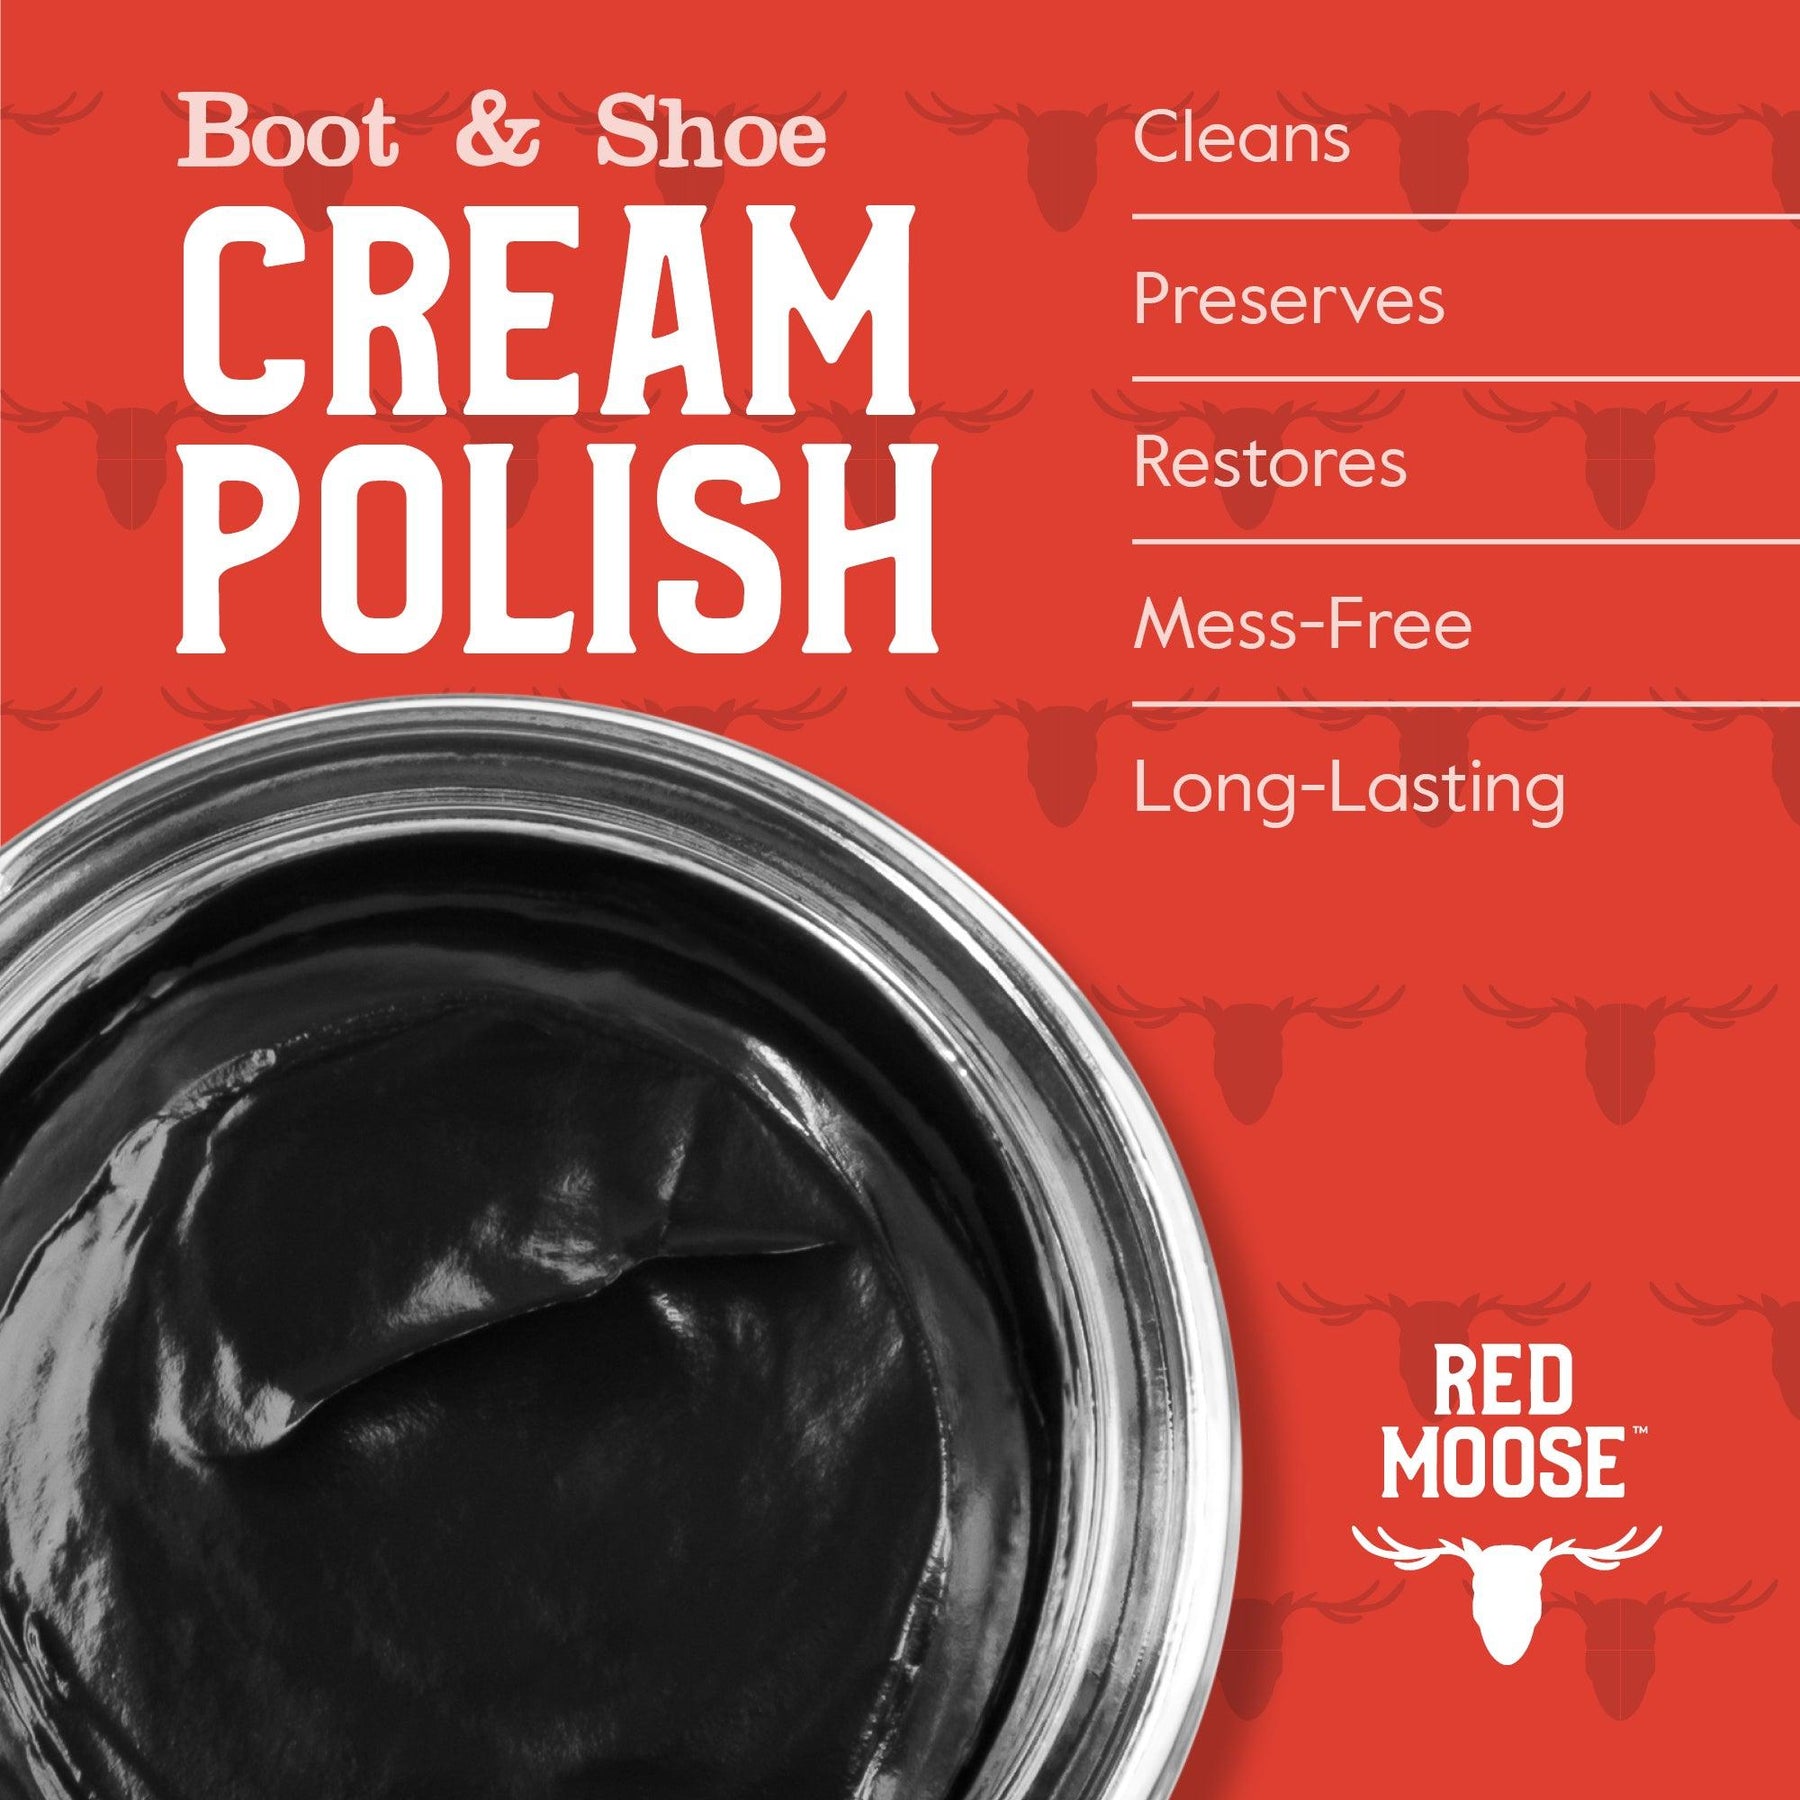 Red Moose Boot and Shoe Cream Polish - Made in The USA, Black